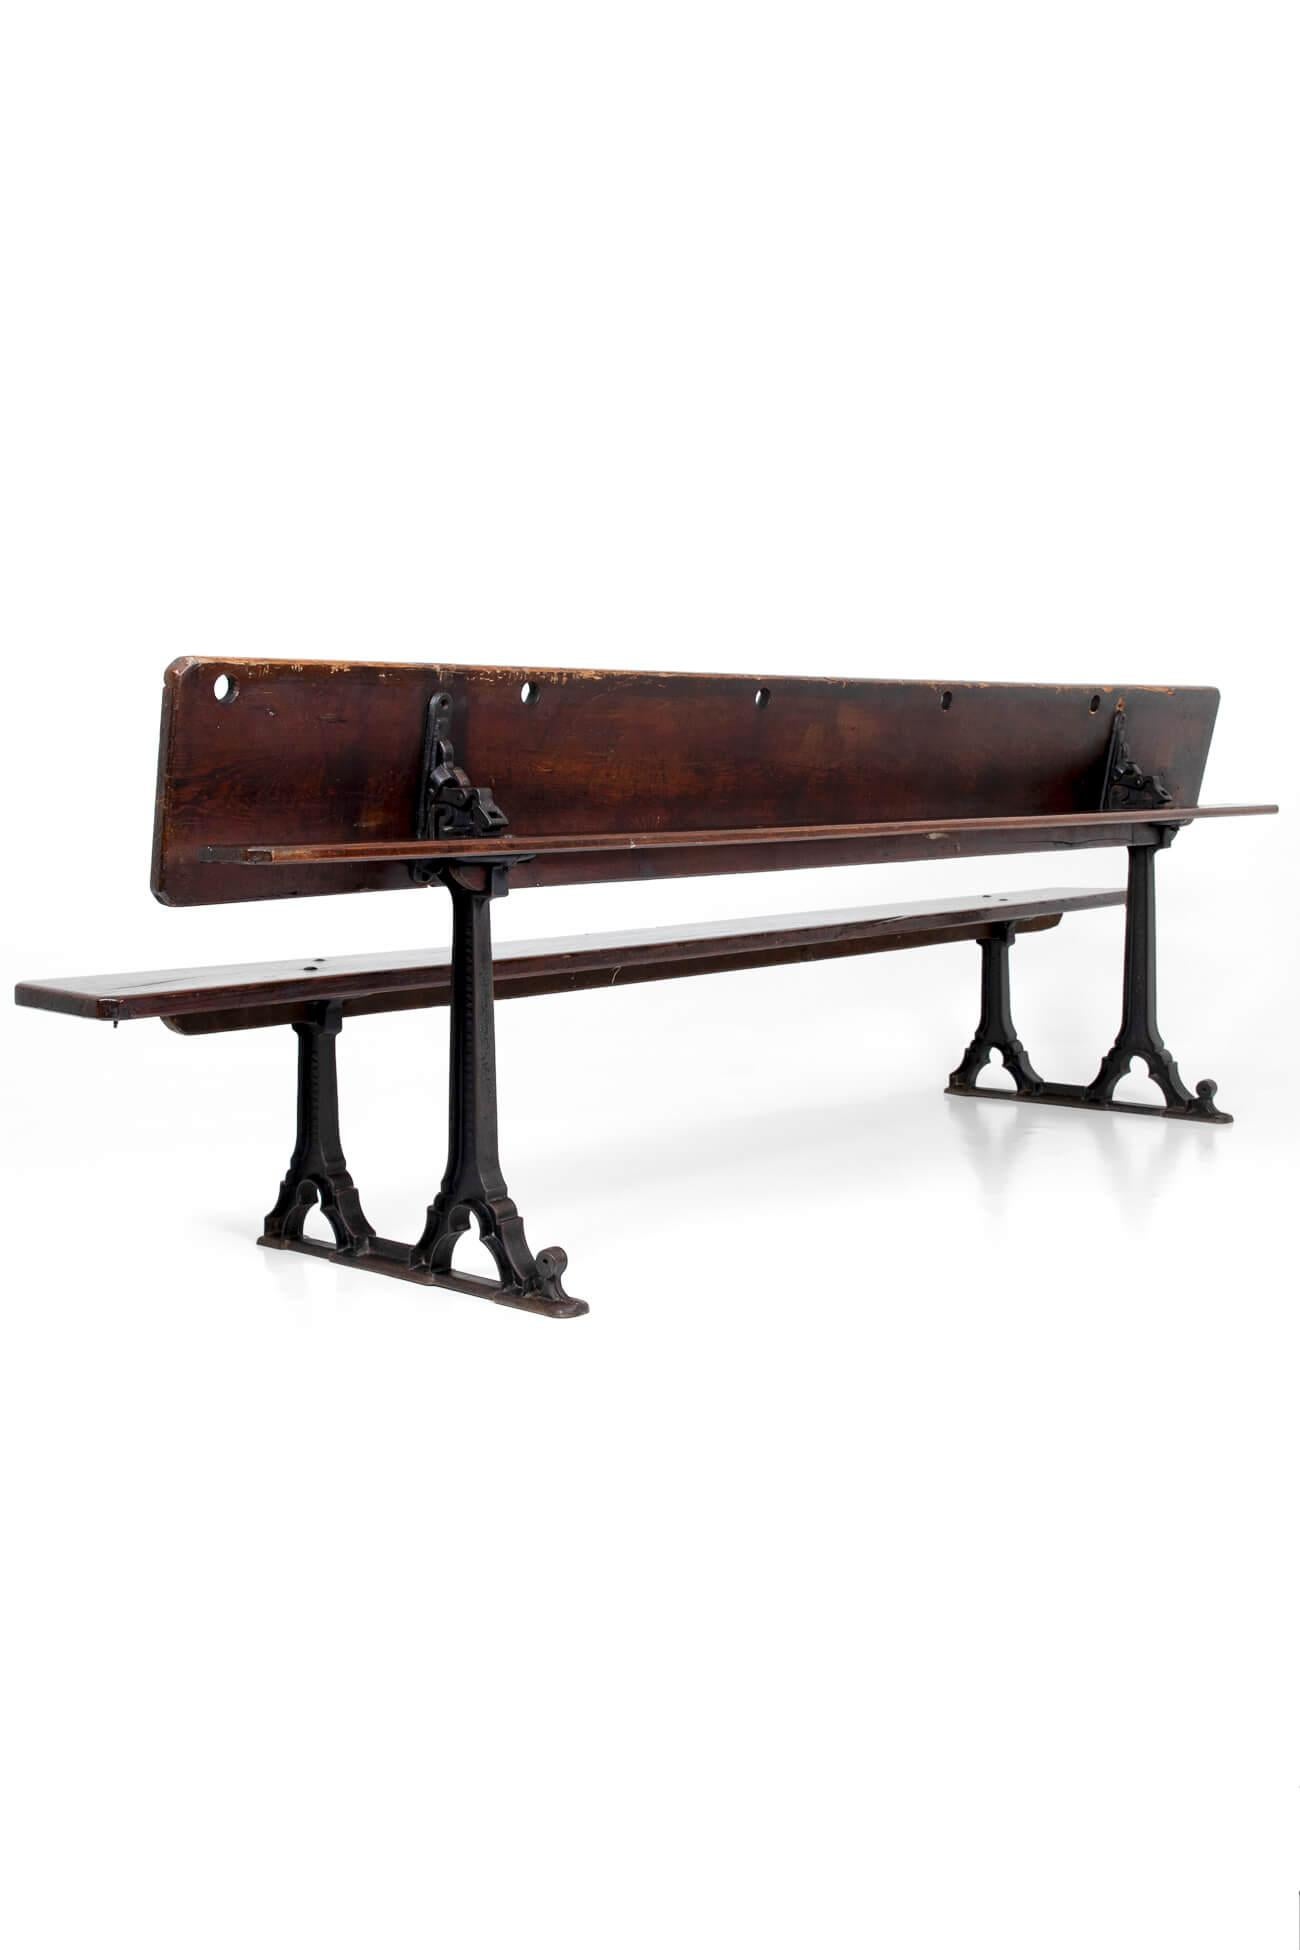 A wonderful pair of Victorian gothic metamorphic chapel benches or school benches. This particular pair had been in situ since 1860 until recently being discovered in a school in the South East of England.
The benches have cast iron legs and